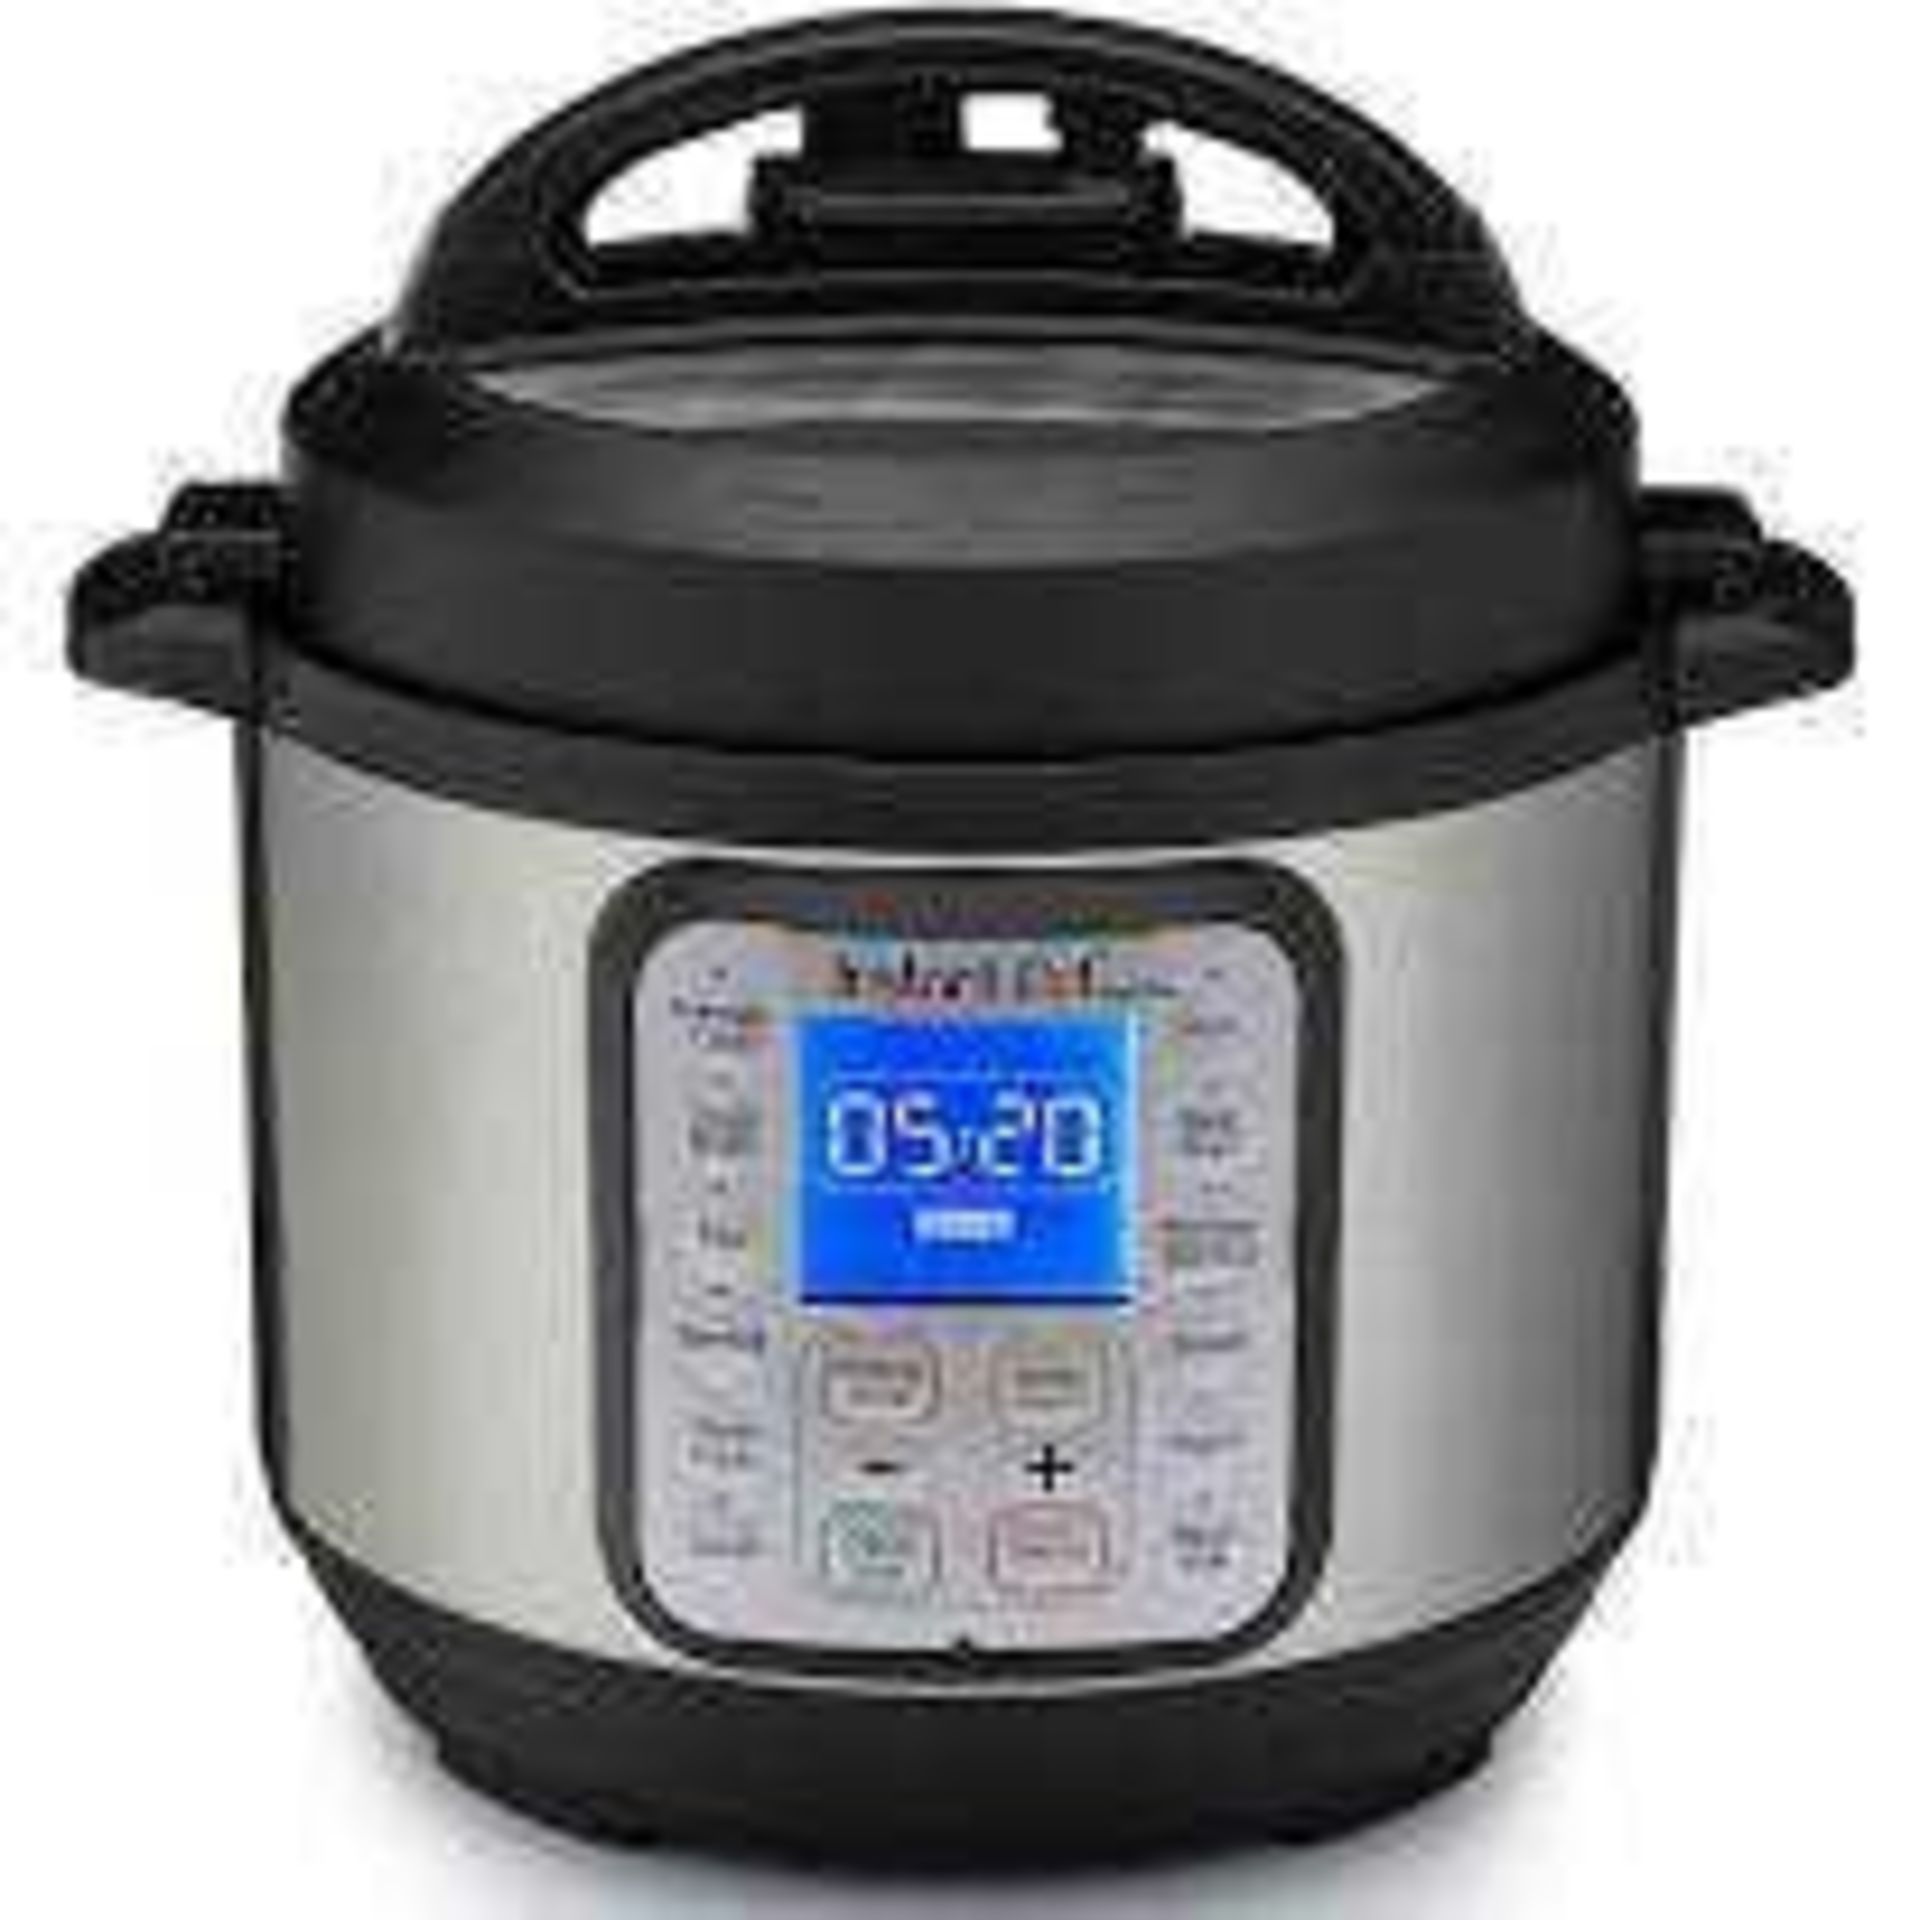 RRP £100 Boxed Instant Pot Duo Plus Multi Use Pressure Cooker